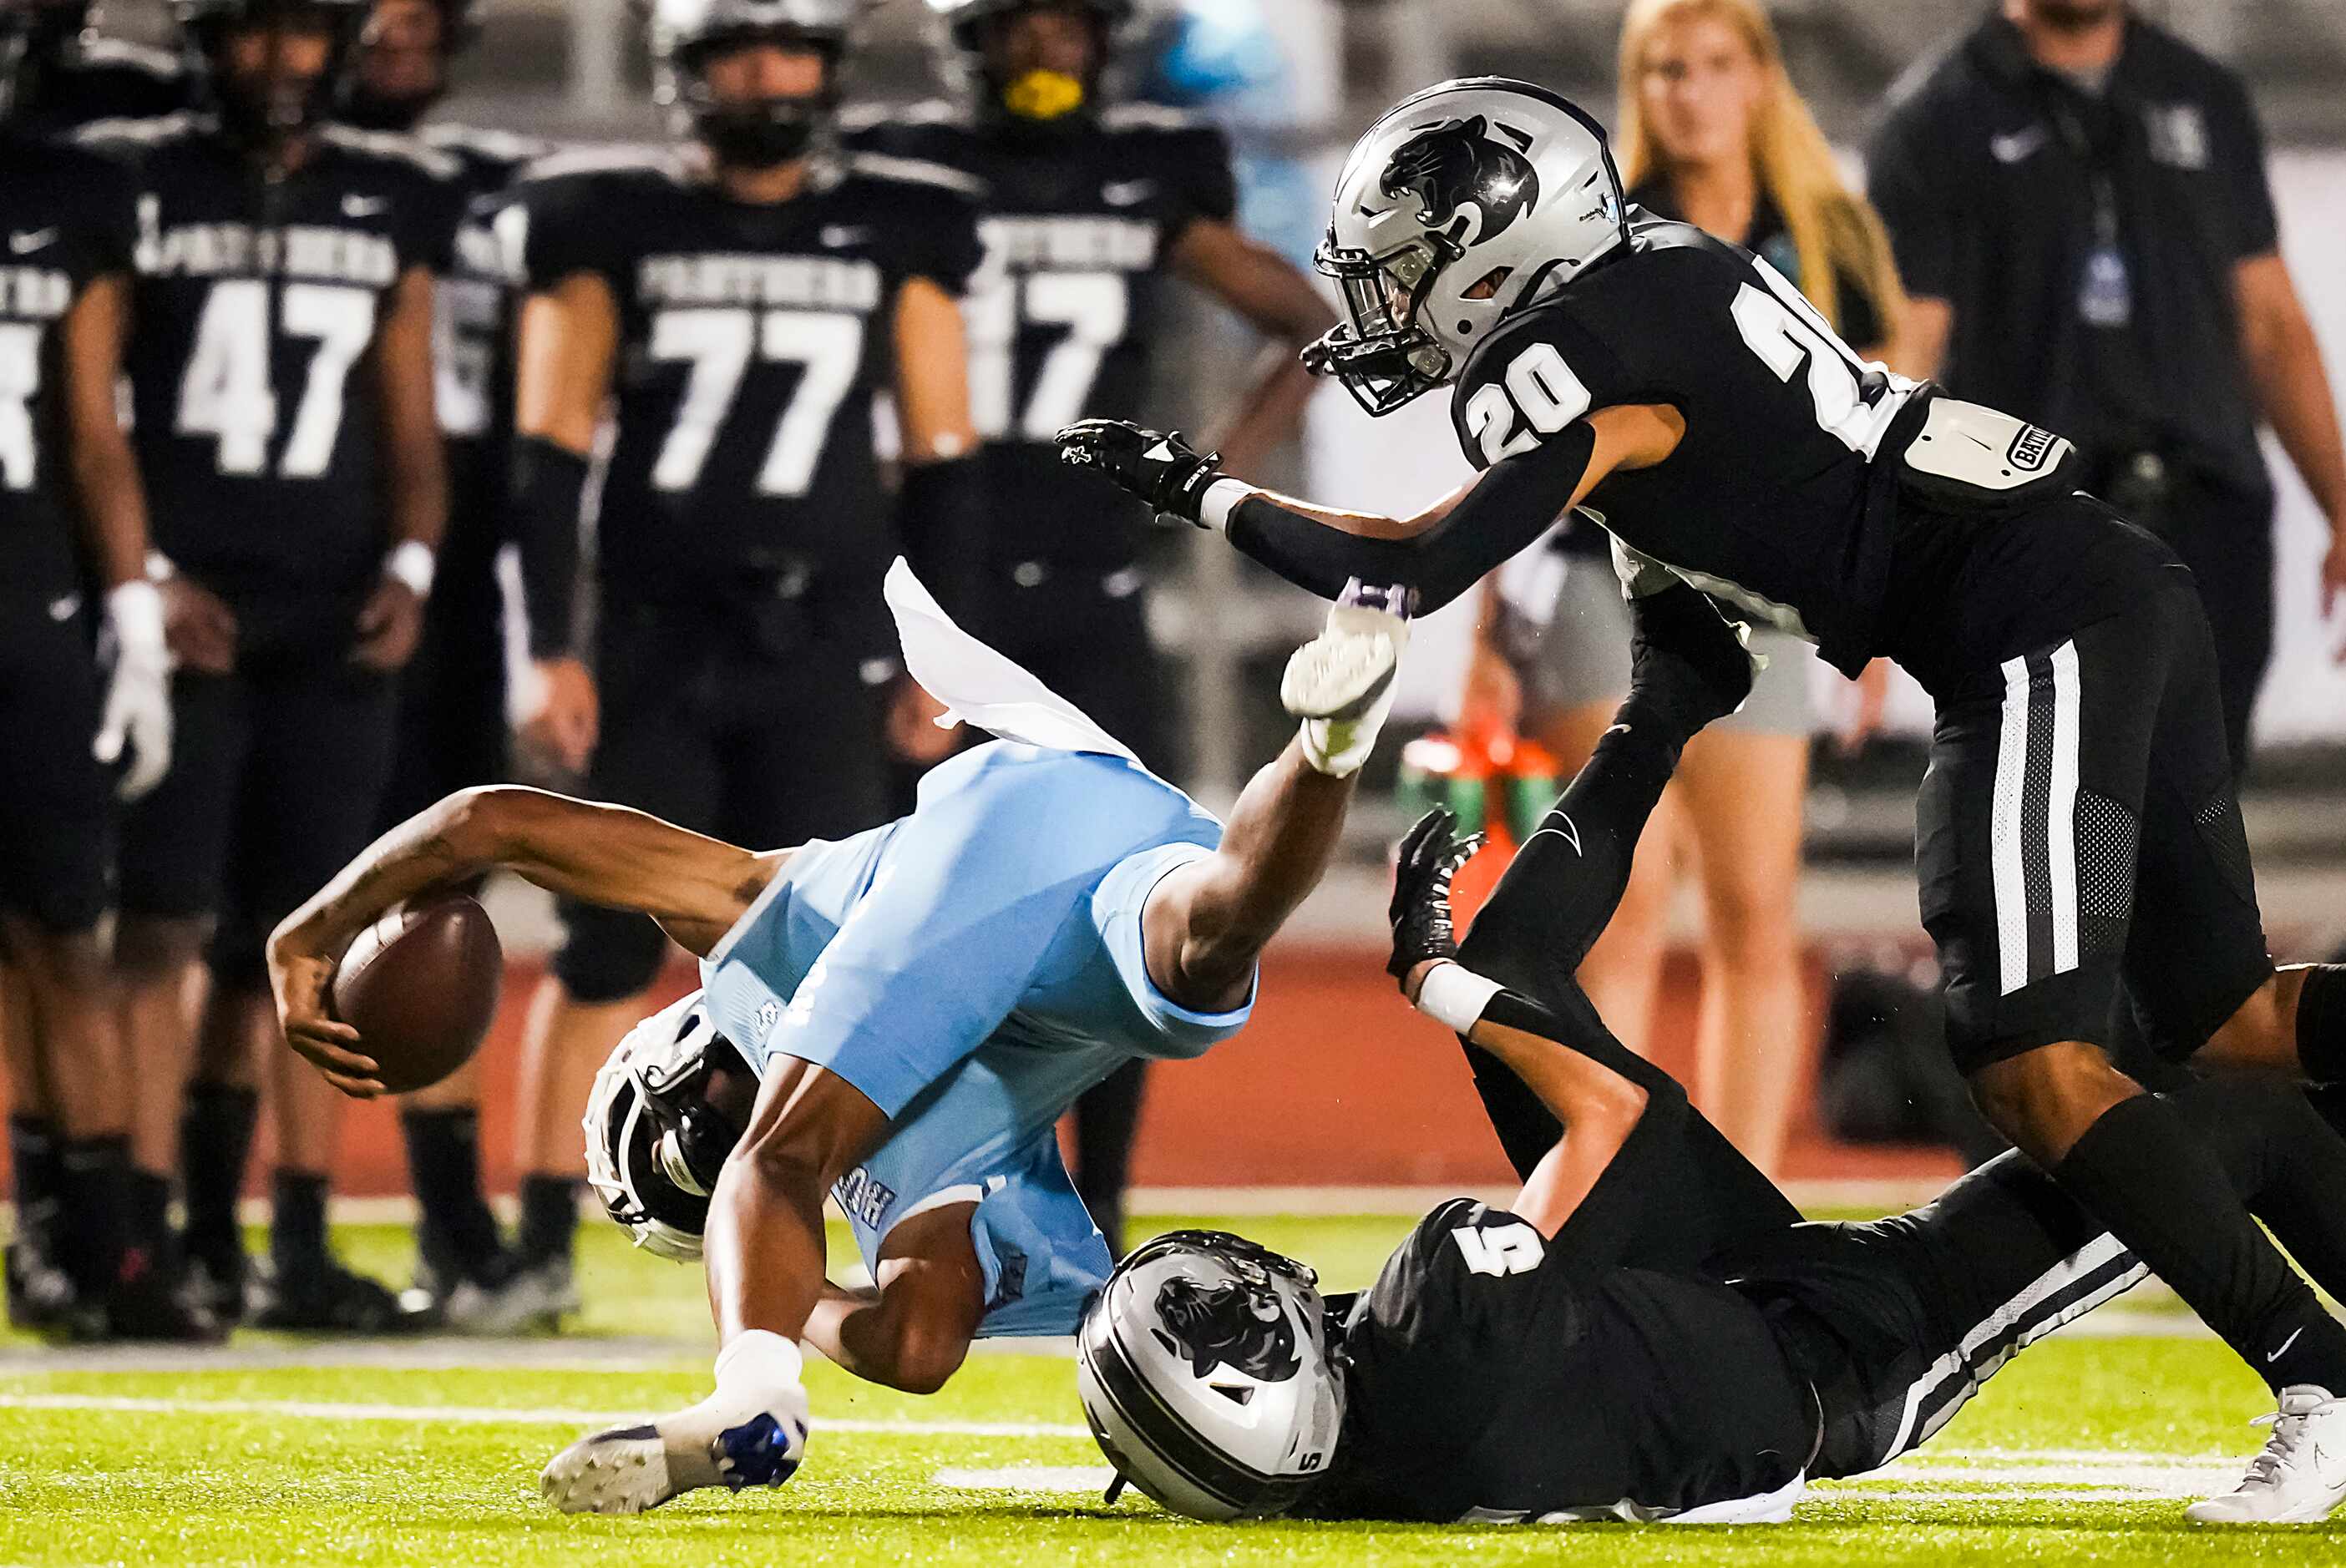 Wilmer-Hutchins quarterback Tamajae Mcmillon (9) is tripped up by Panther Creek   linebacker...